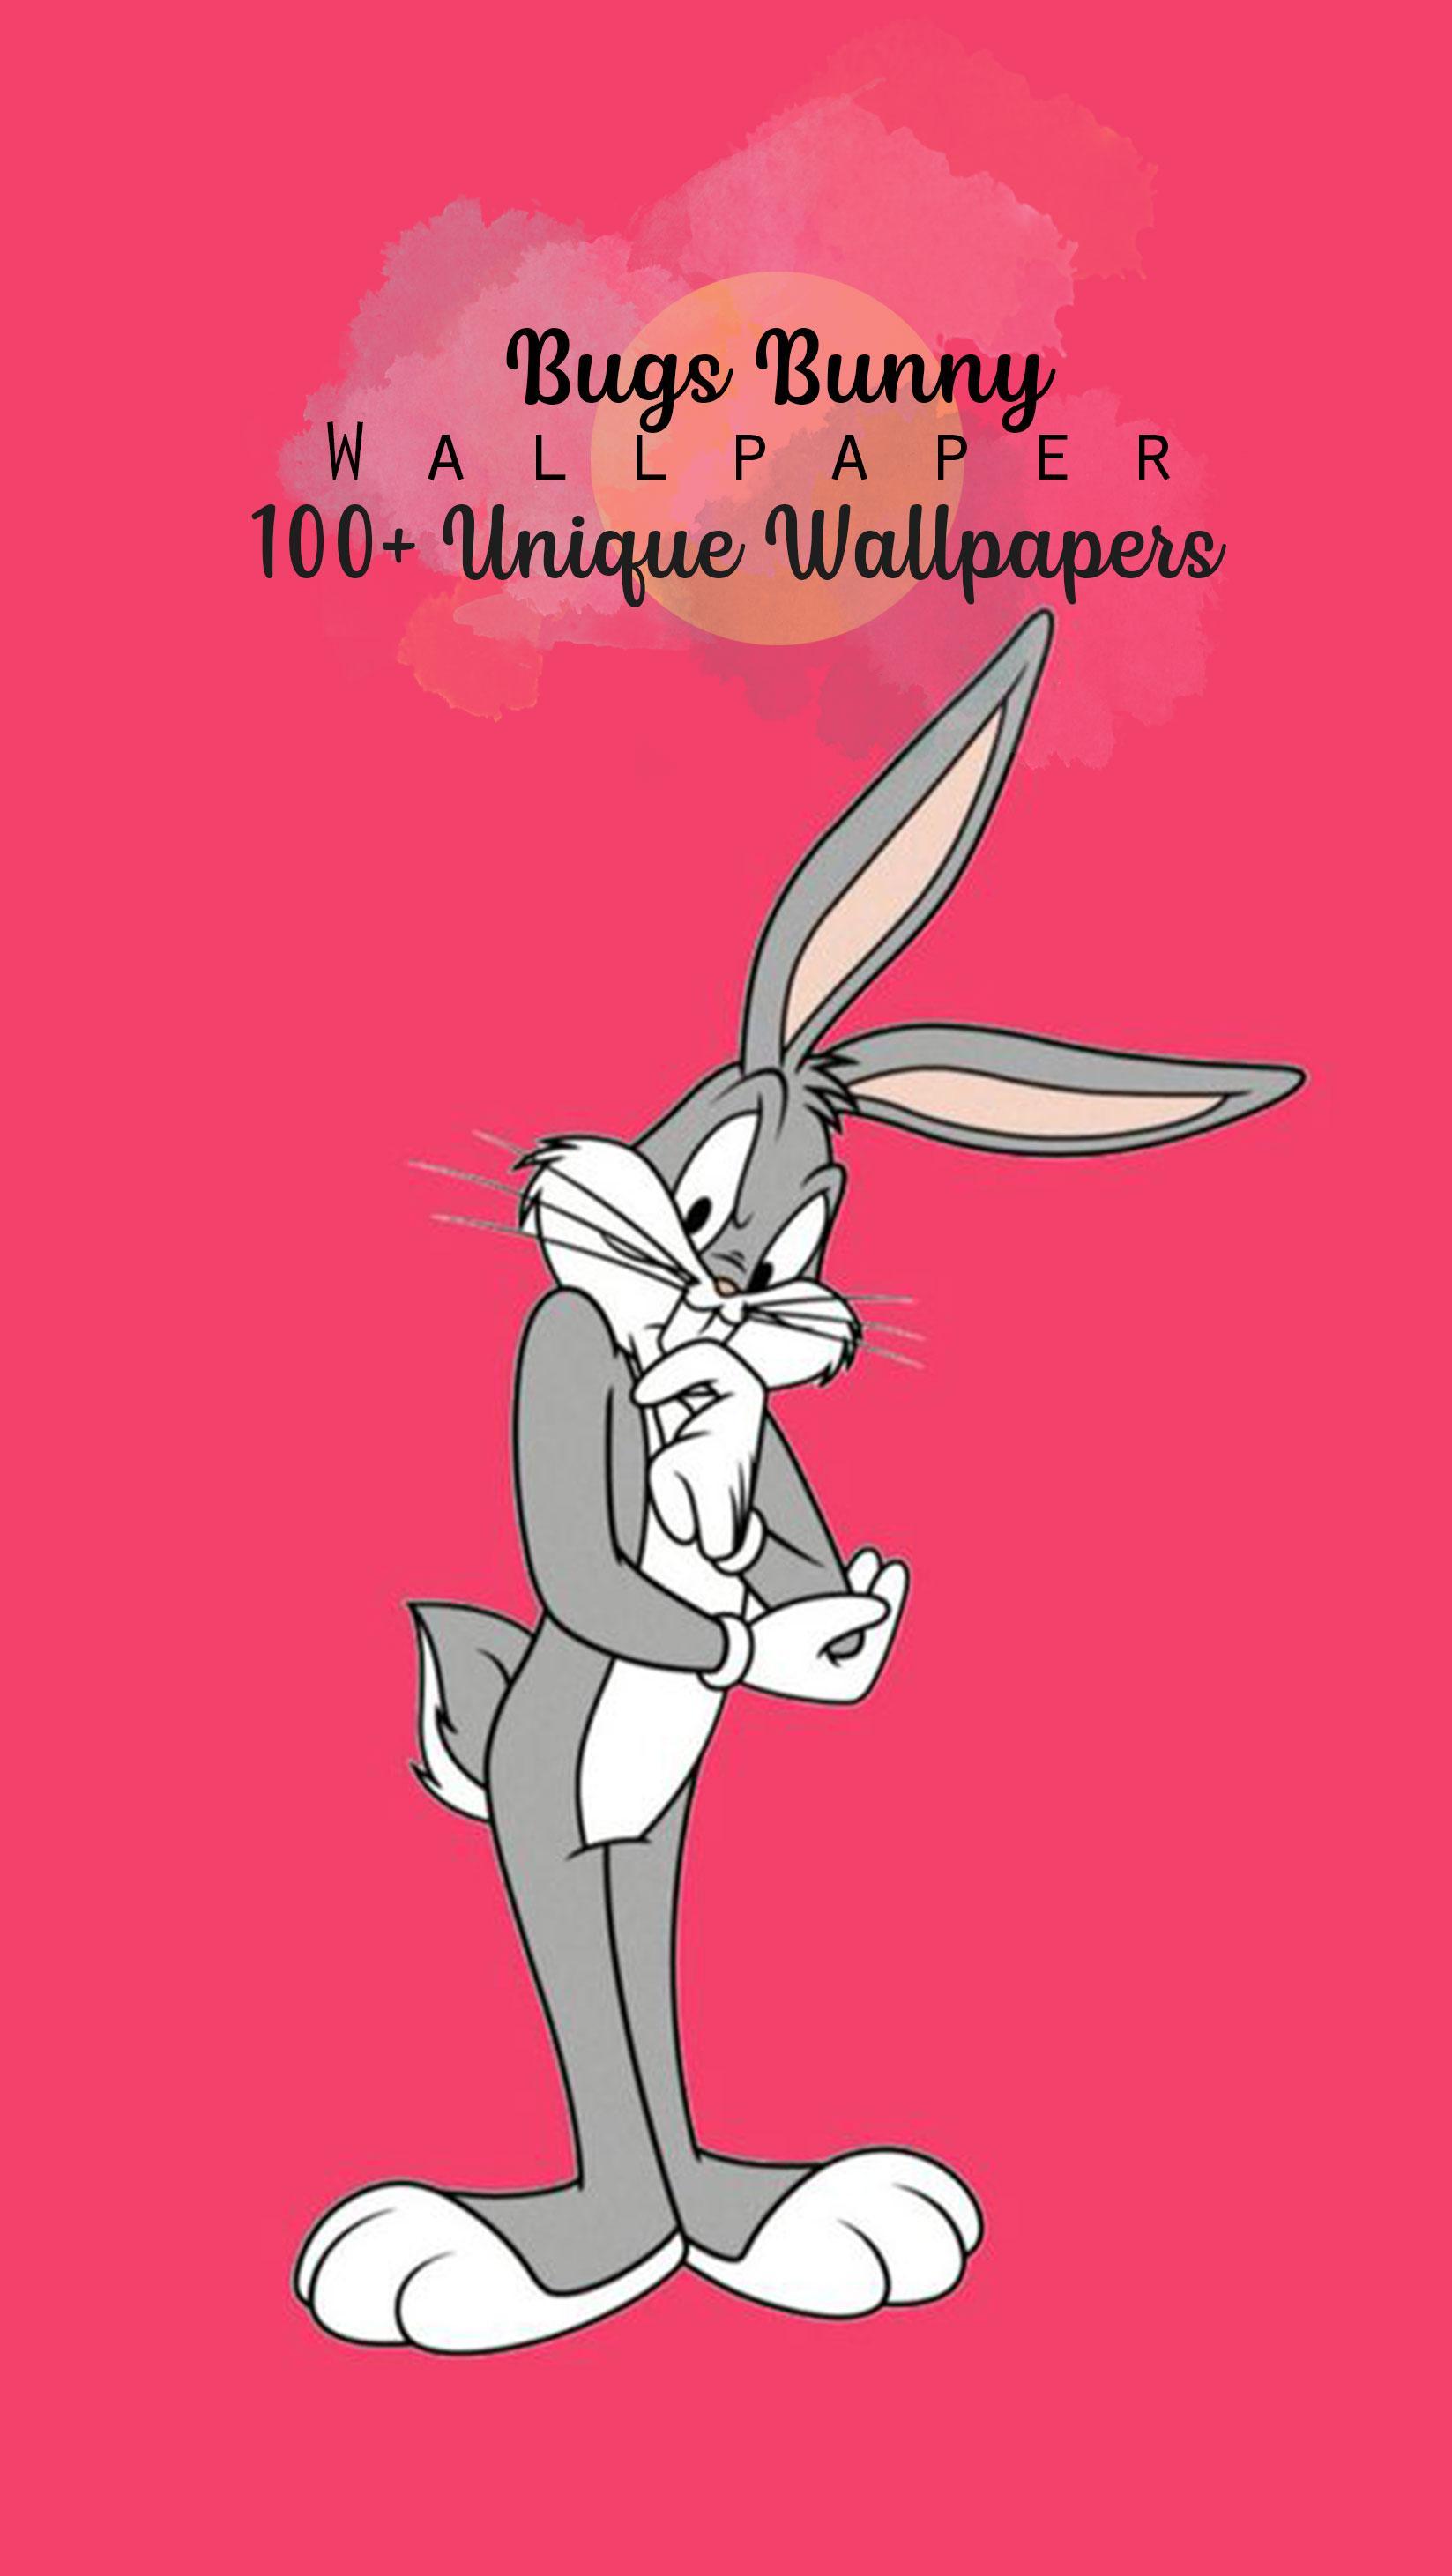 Bugs Bunny Wallpaper for Android